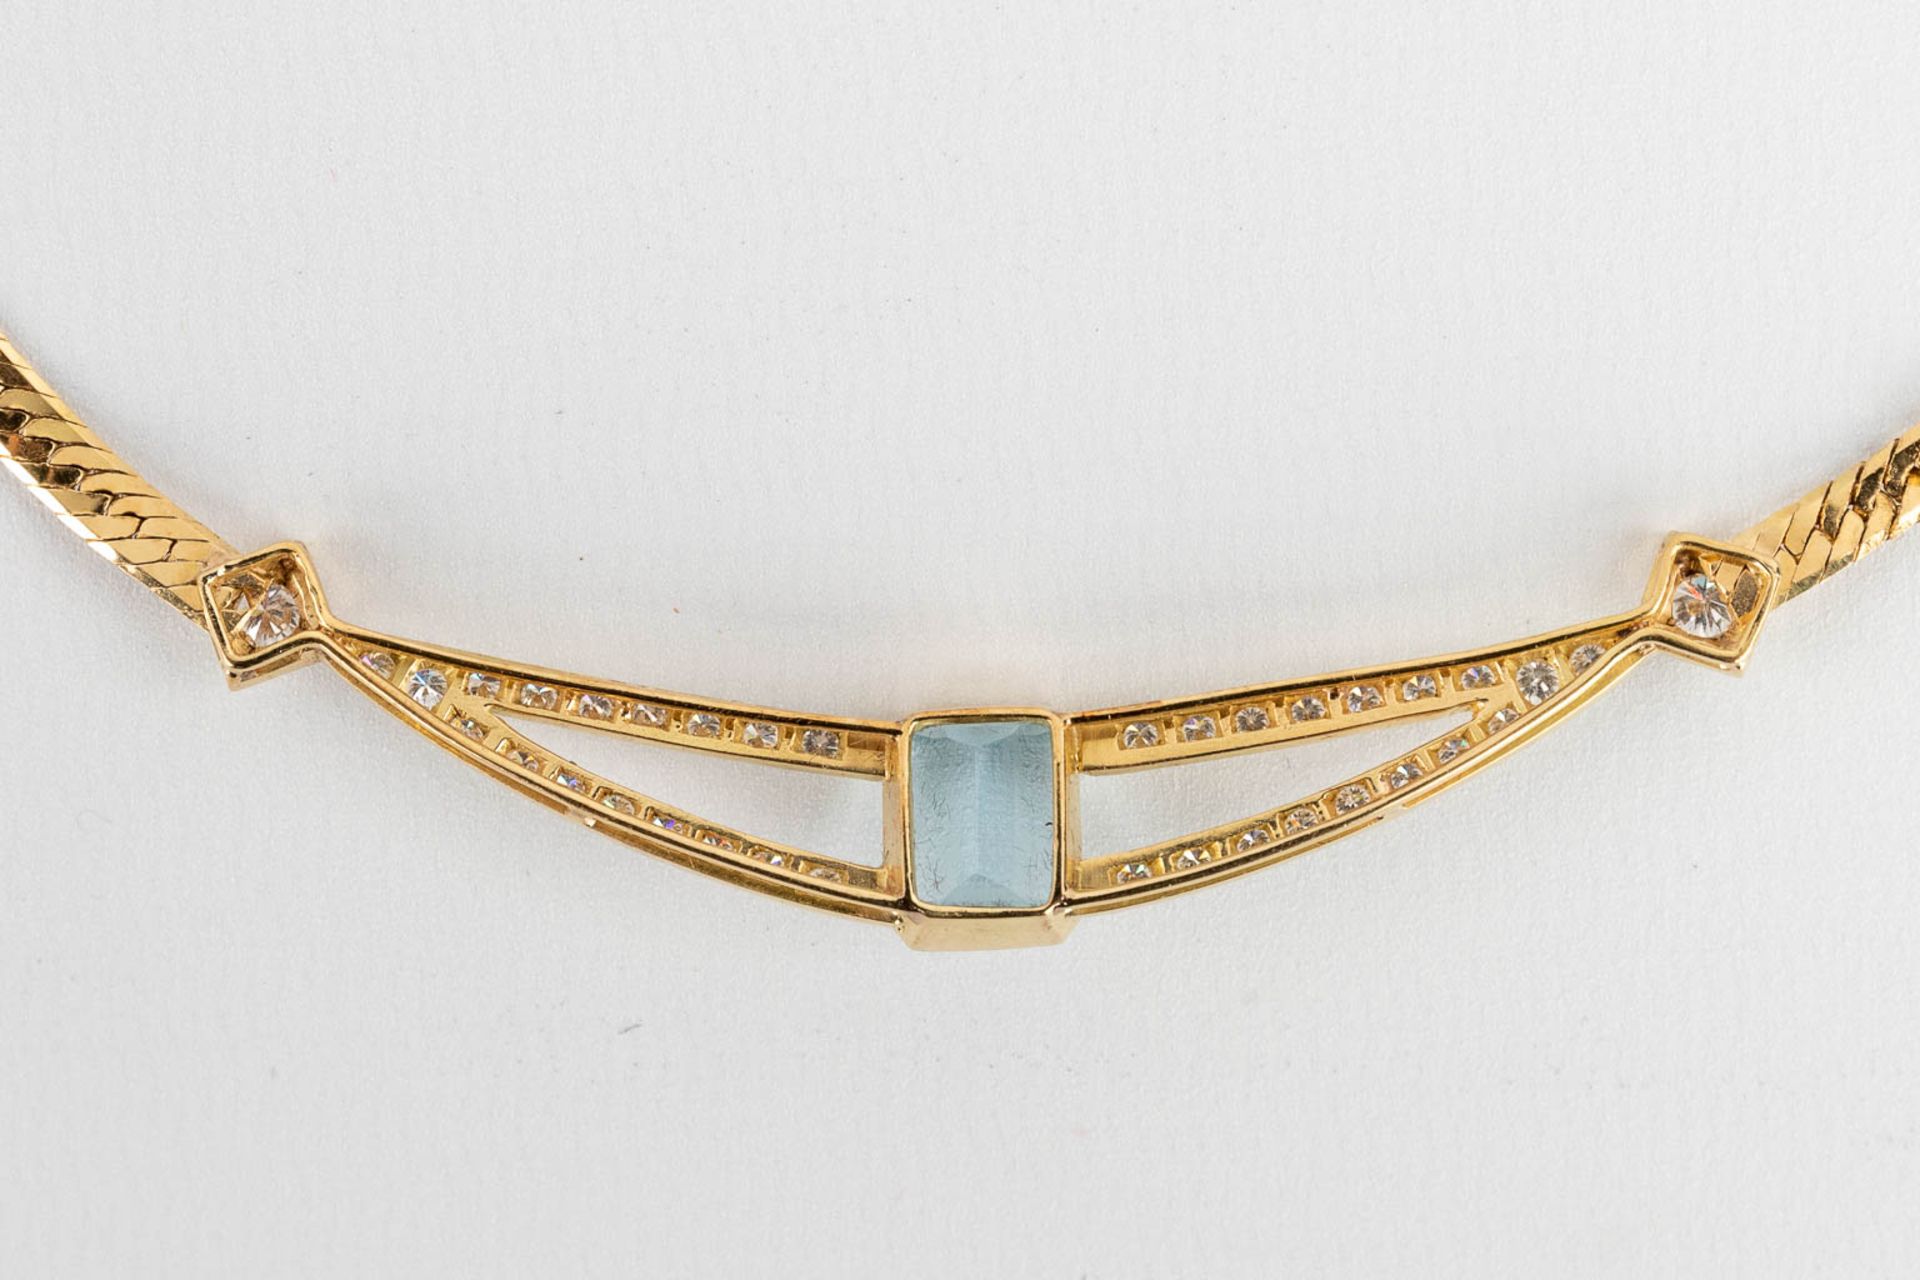 A necklace with two earrings, 18kt yellow gold Brilliants and Topaz/Aquamarine, 26,77g. - Image 10 of 15